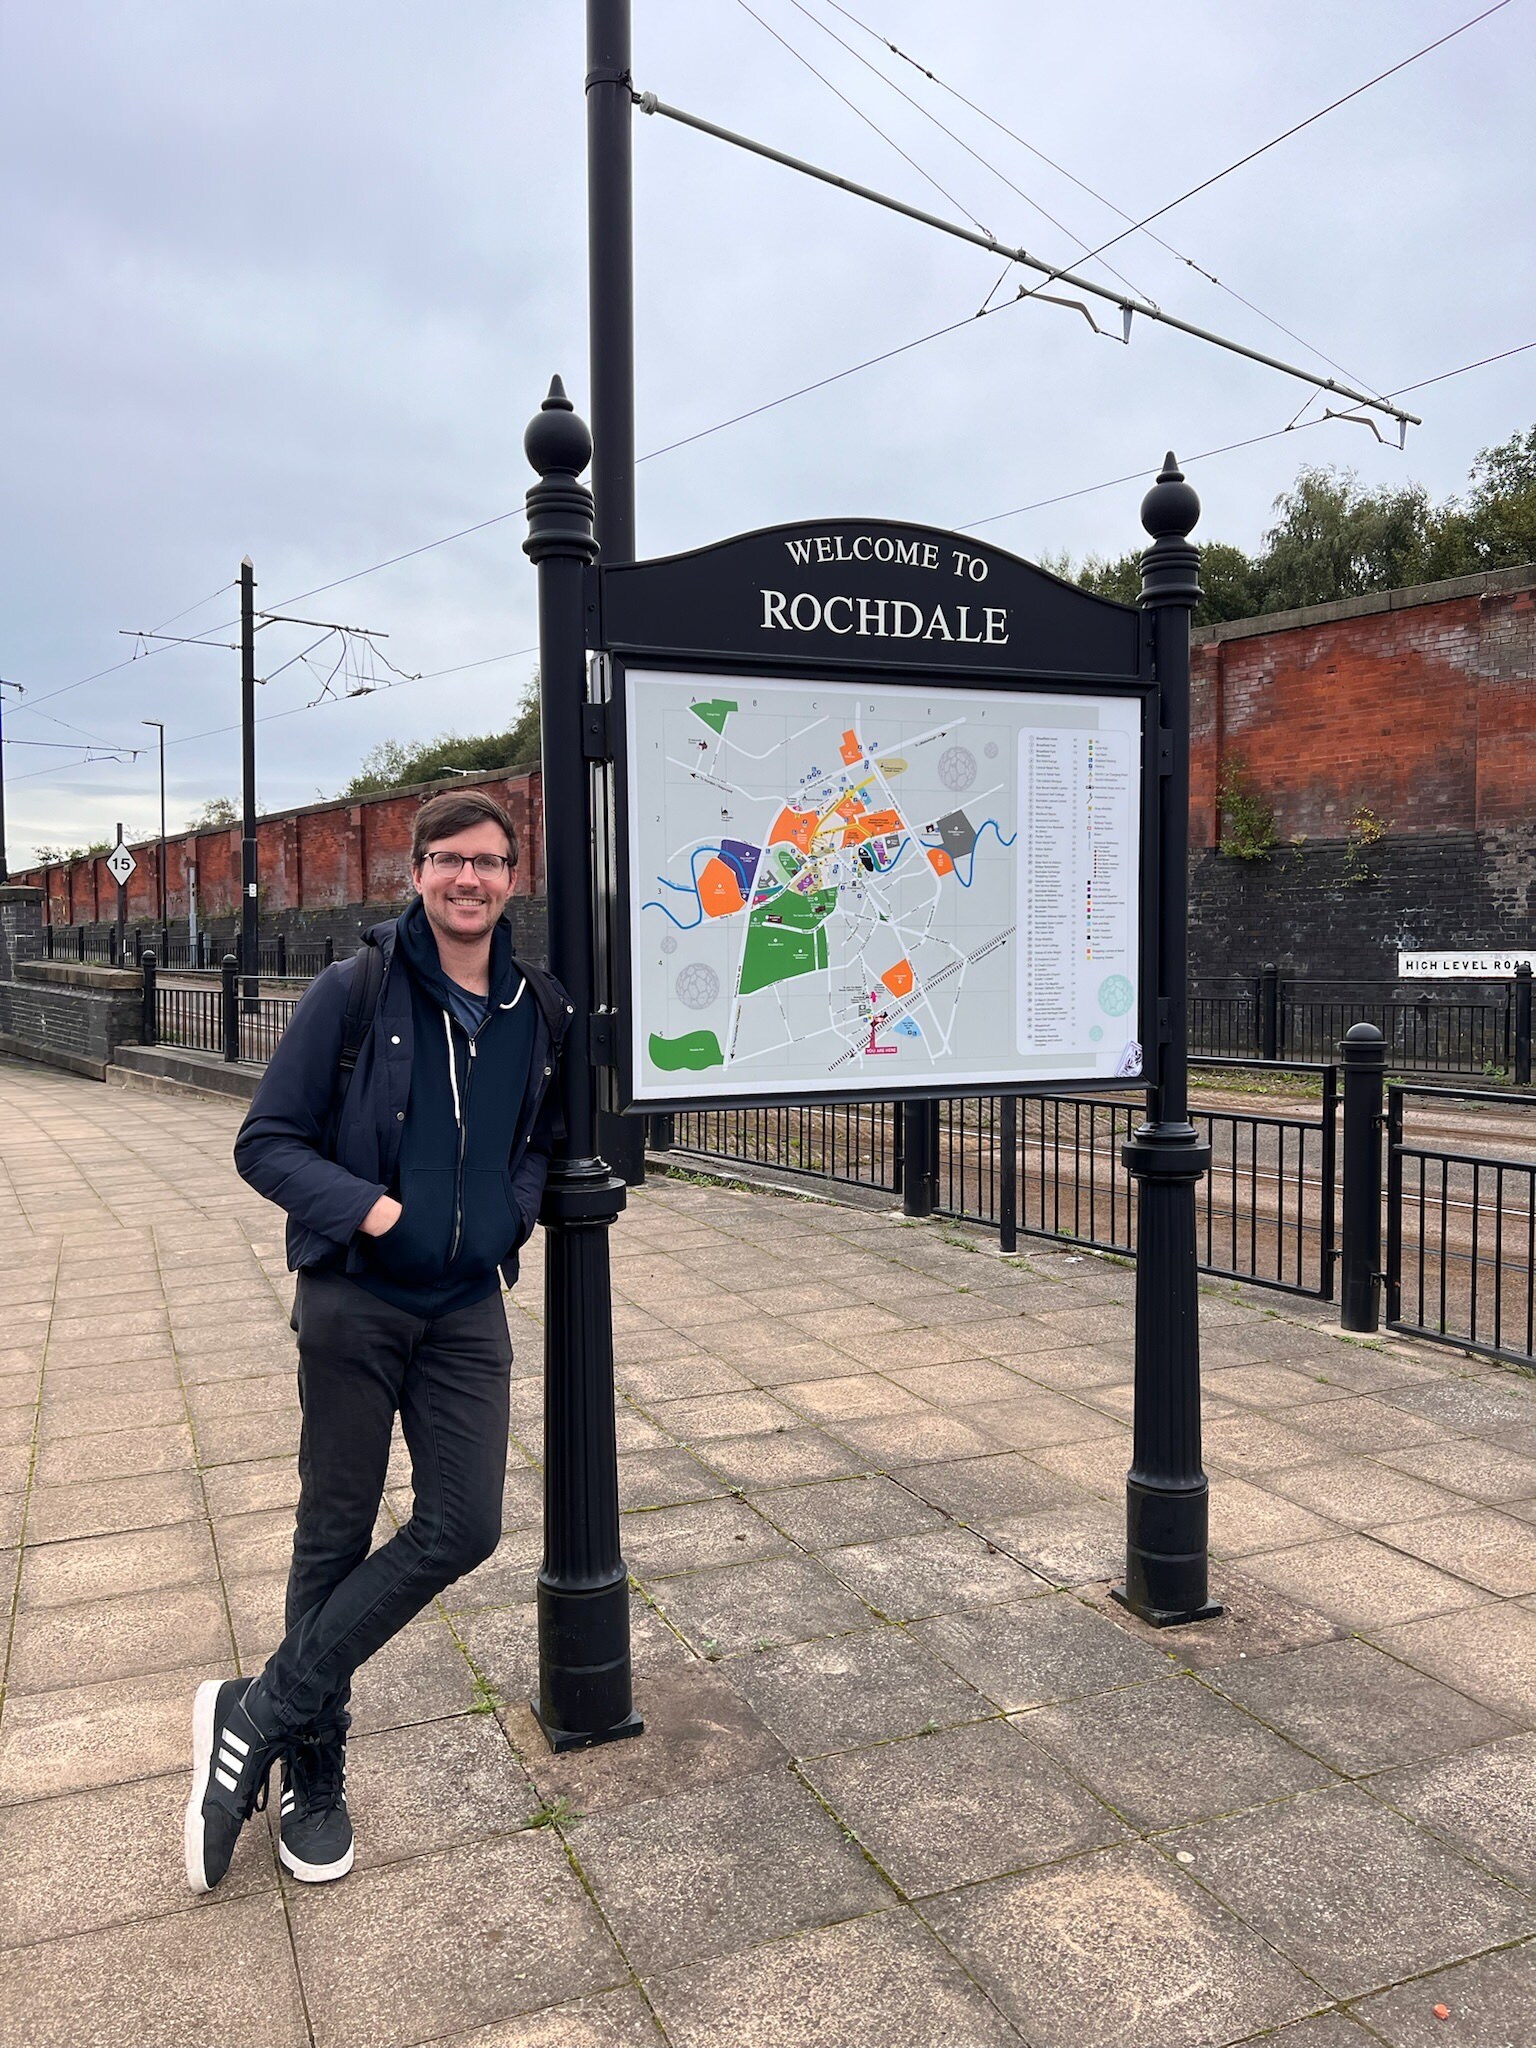 A smiling dude standing next to a sign that says “Welcome to Rochdale” and displays a town map